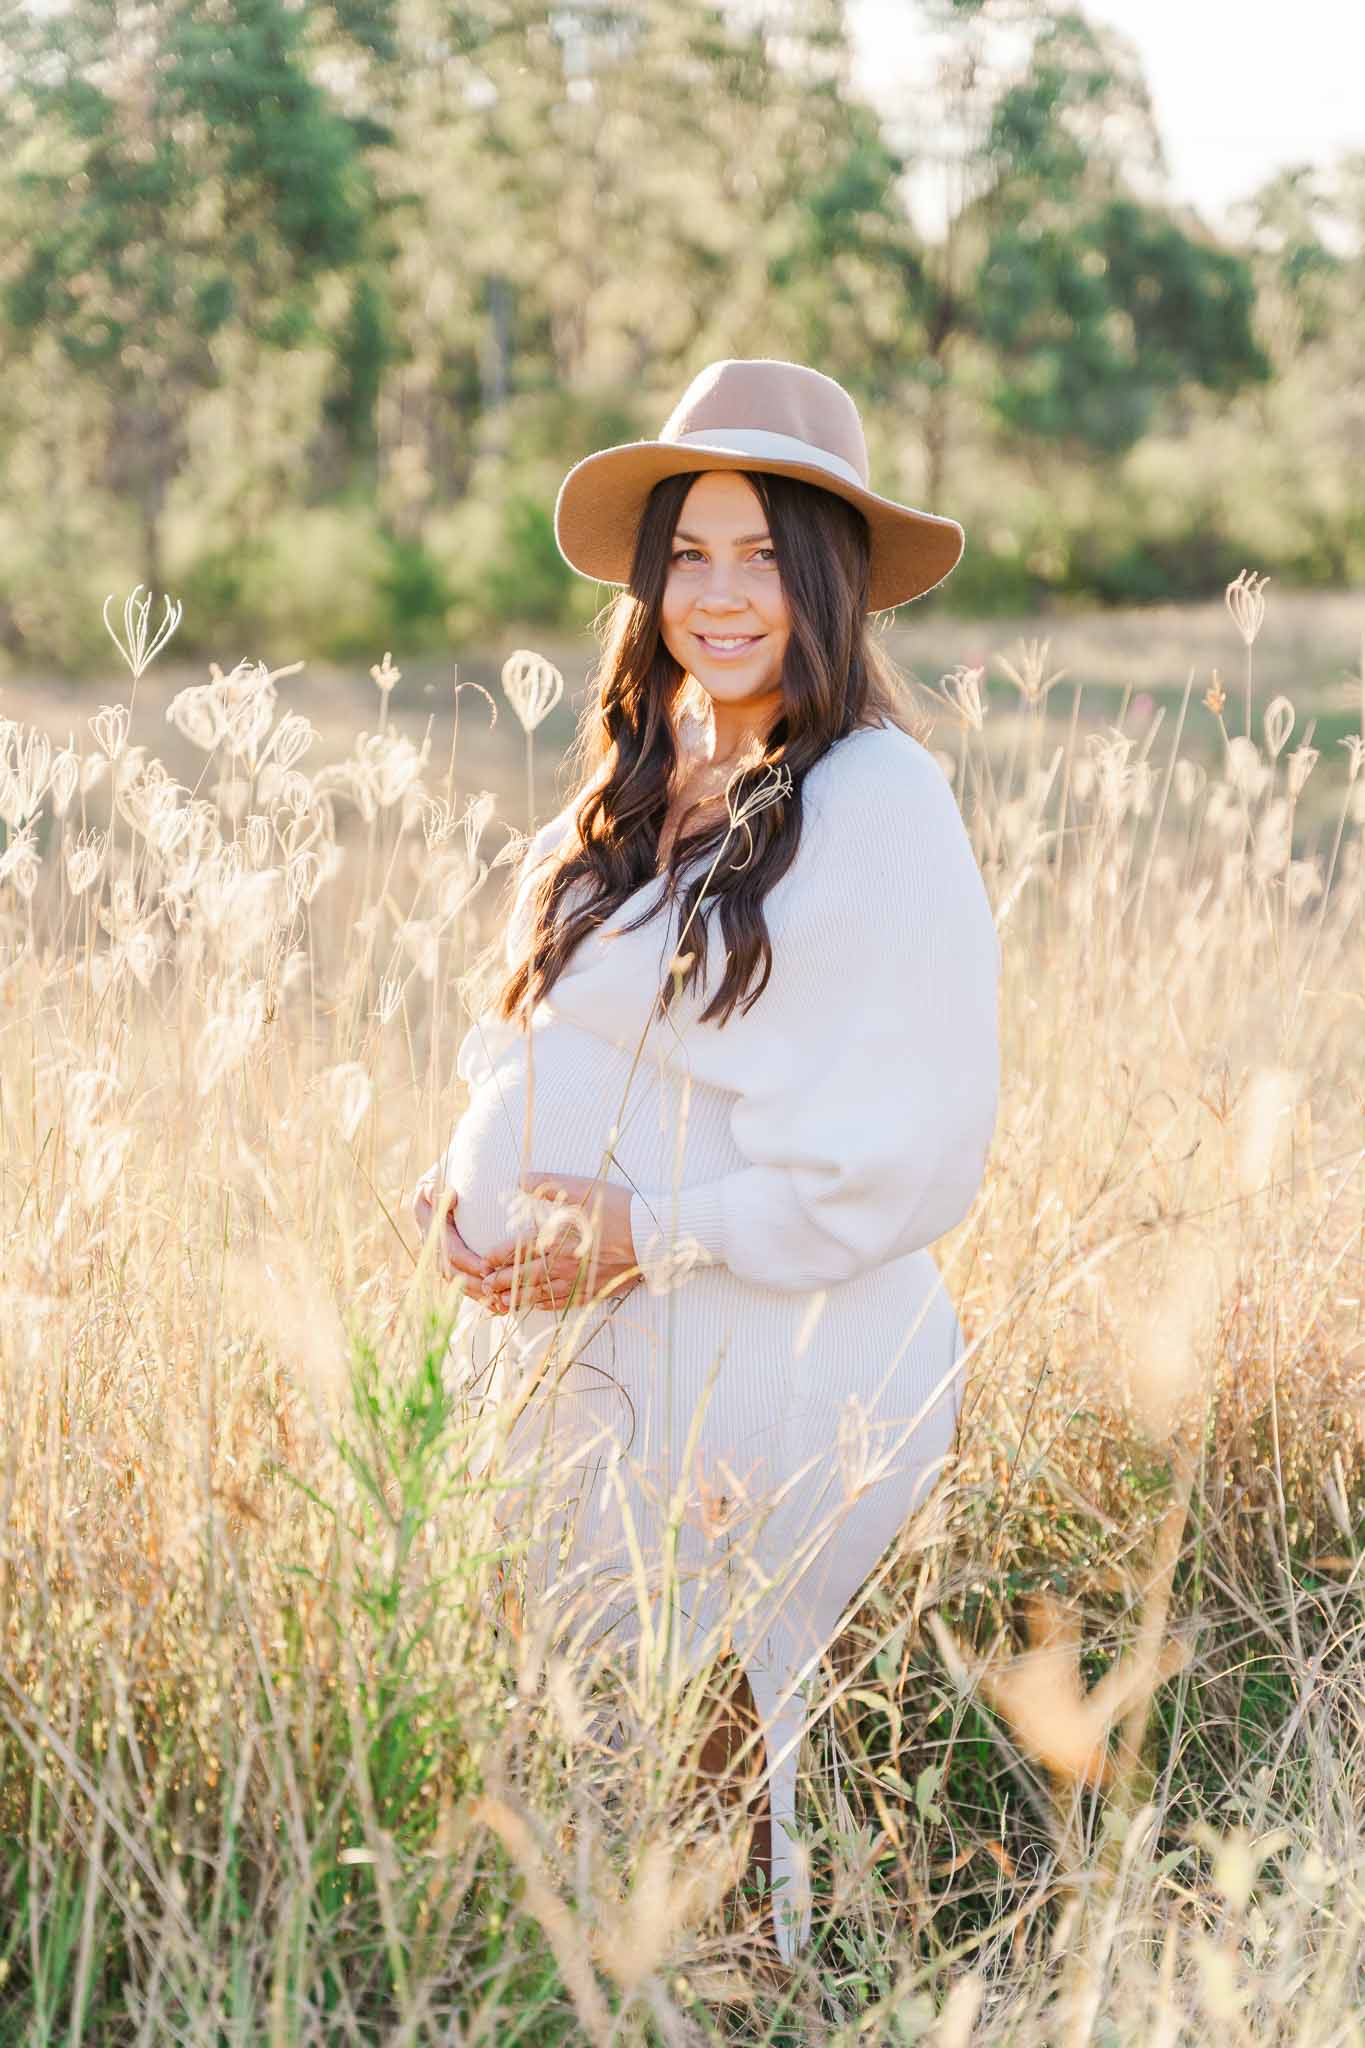 Pregnant woman standing in a field of wait high golden grass during her maternity photo shoot